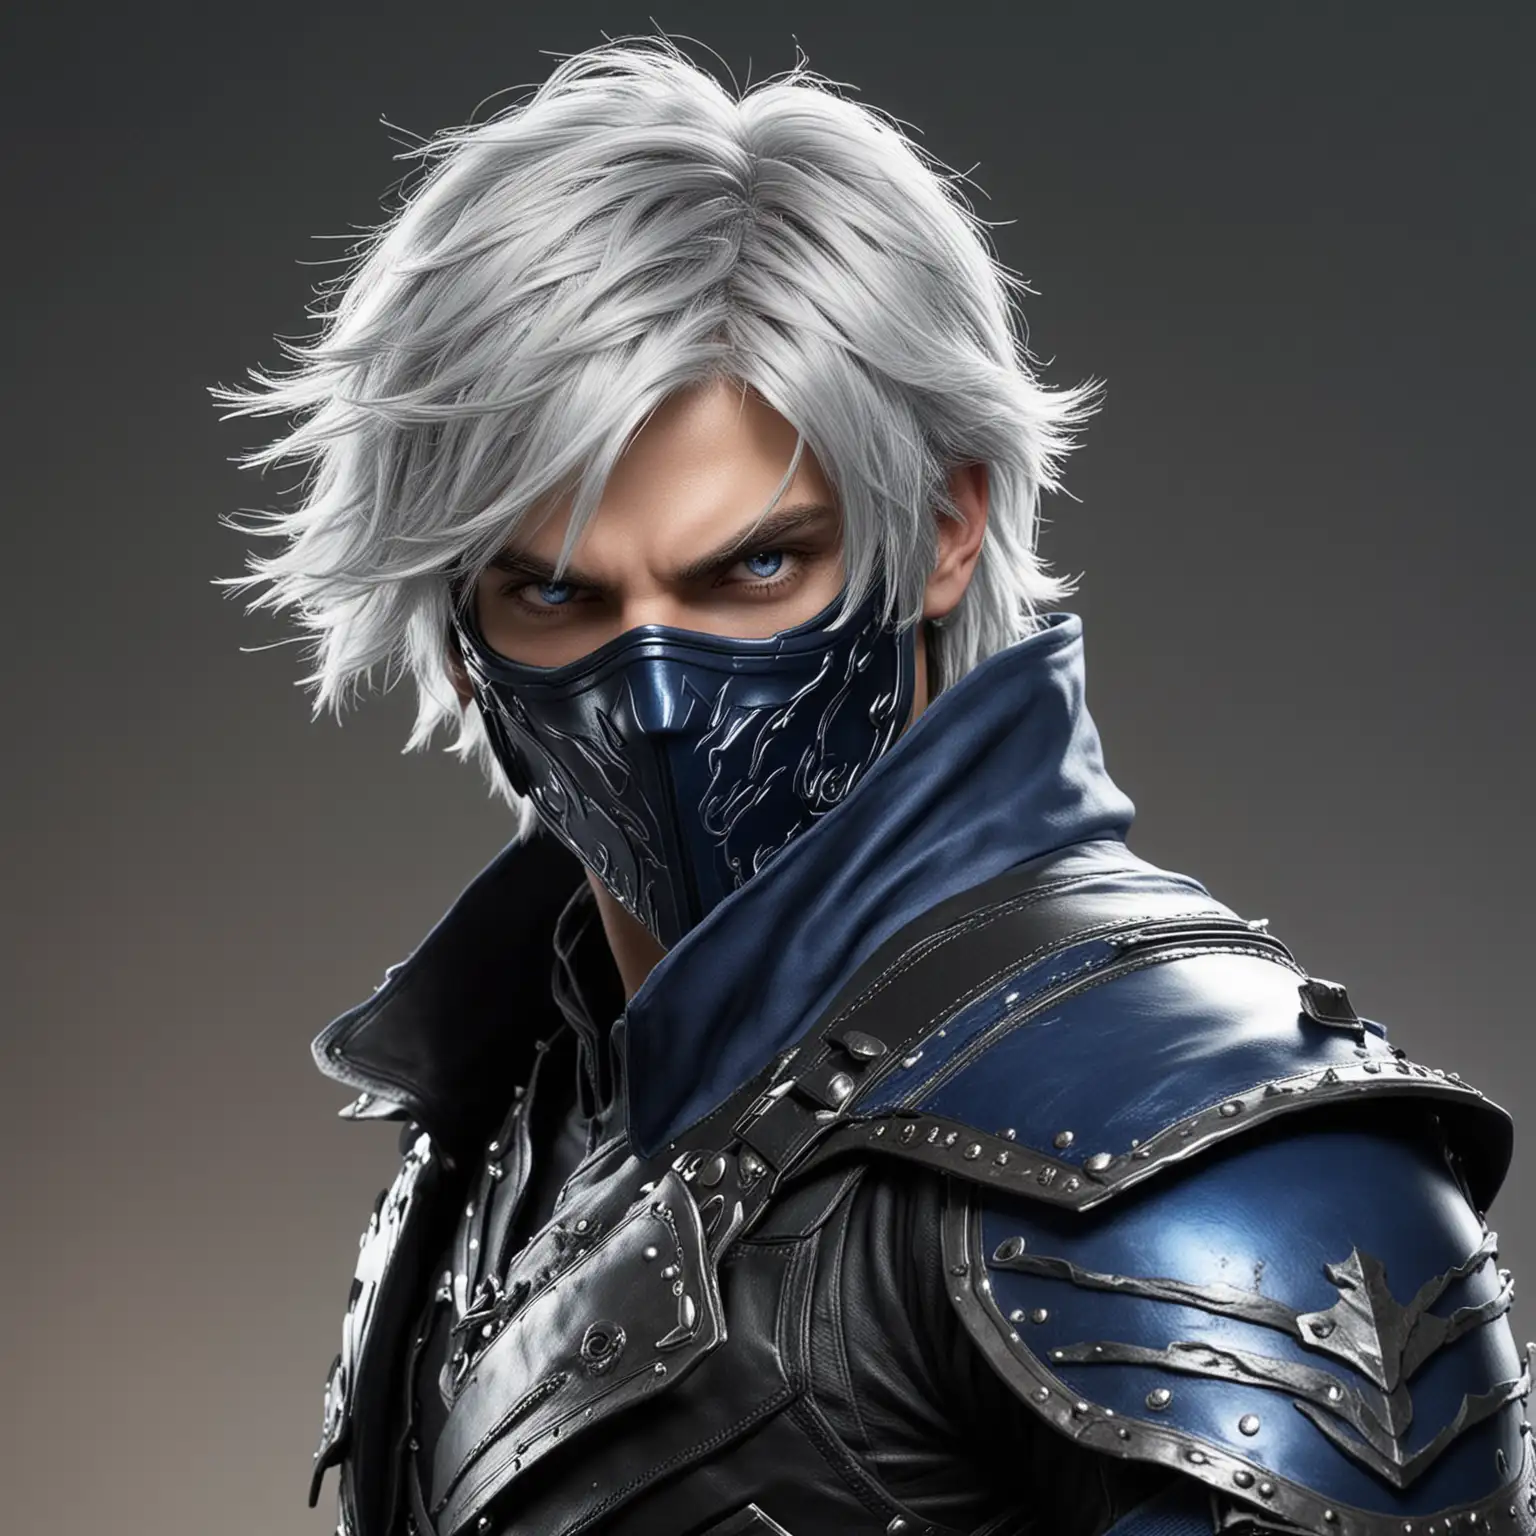 Mysterious Ruggedly Handsome Male Assassin in Black and Blue Leather Armor with Lightning Powers